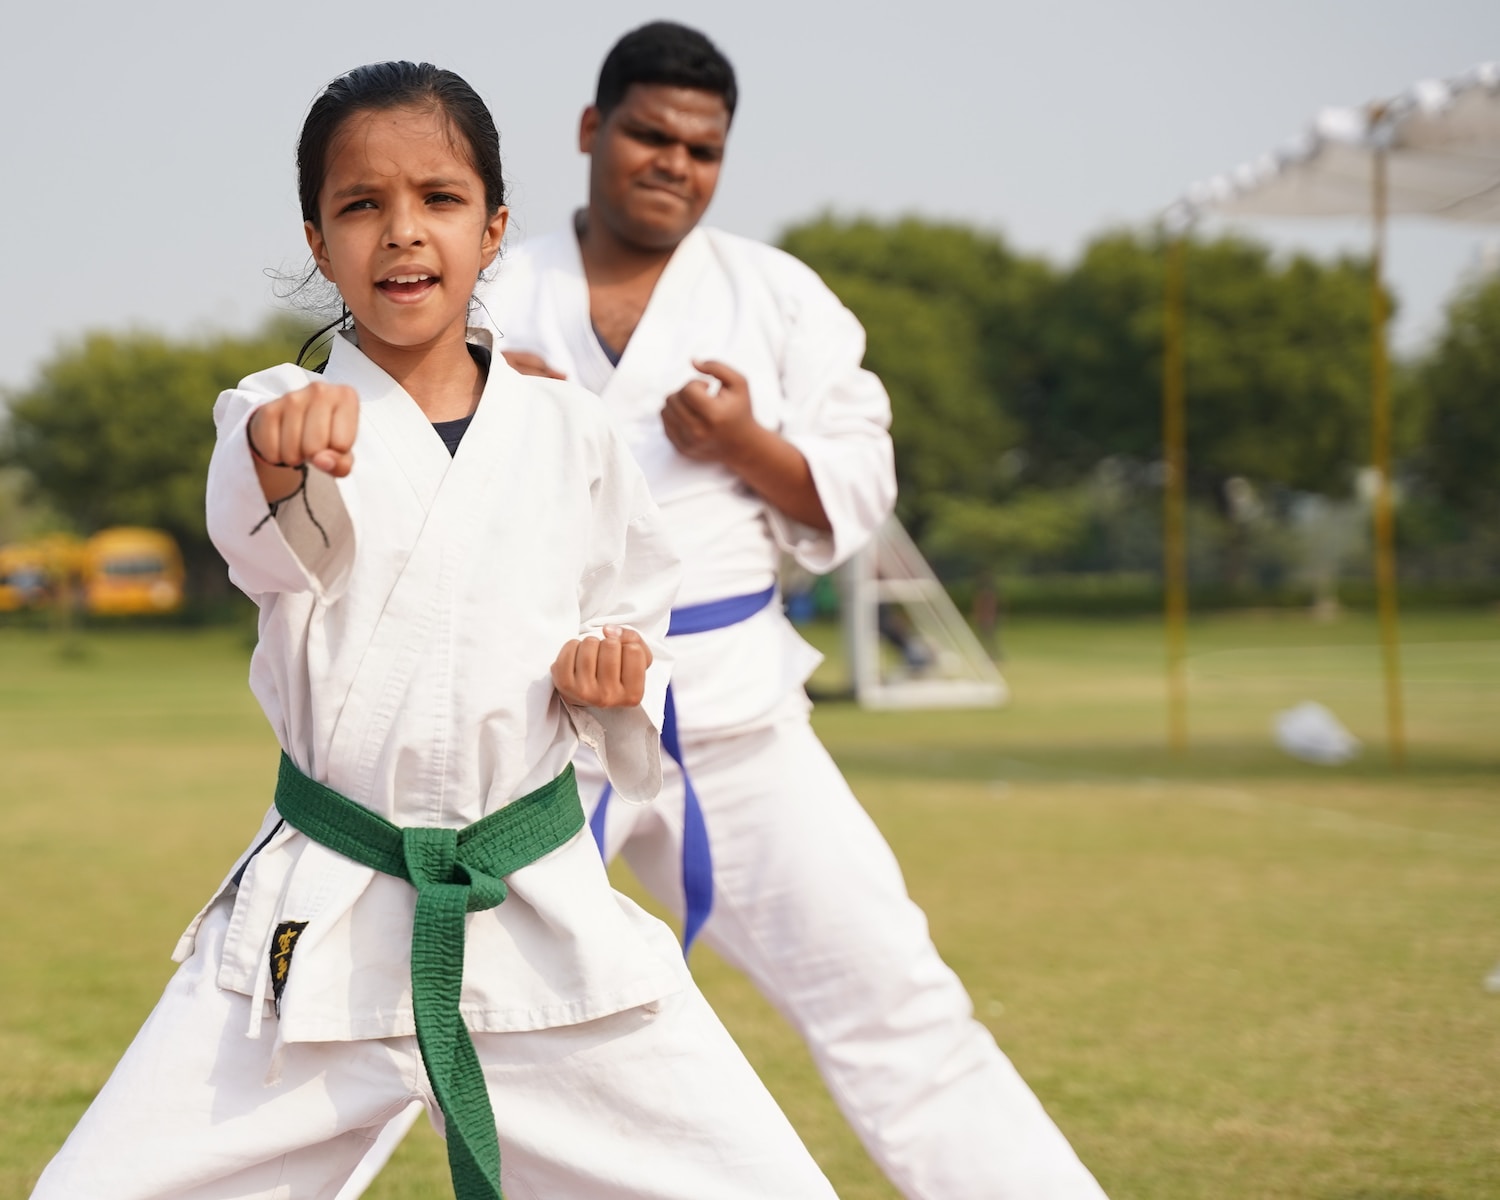 Martial Arts for Girls is Great for Empowerment